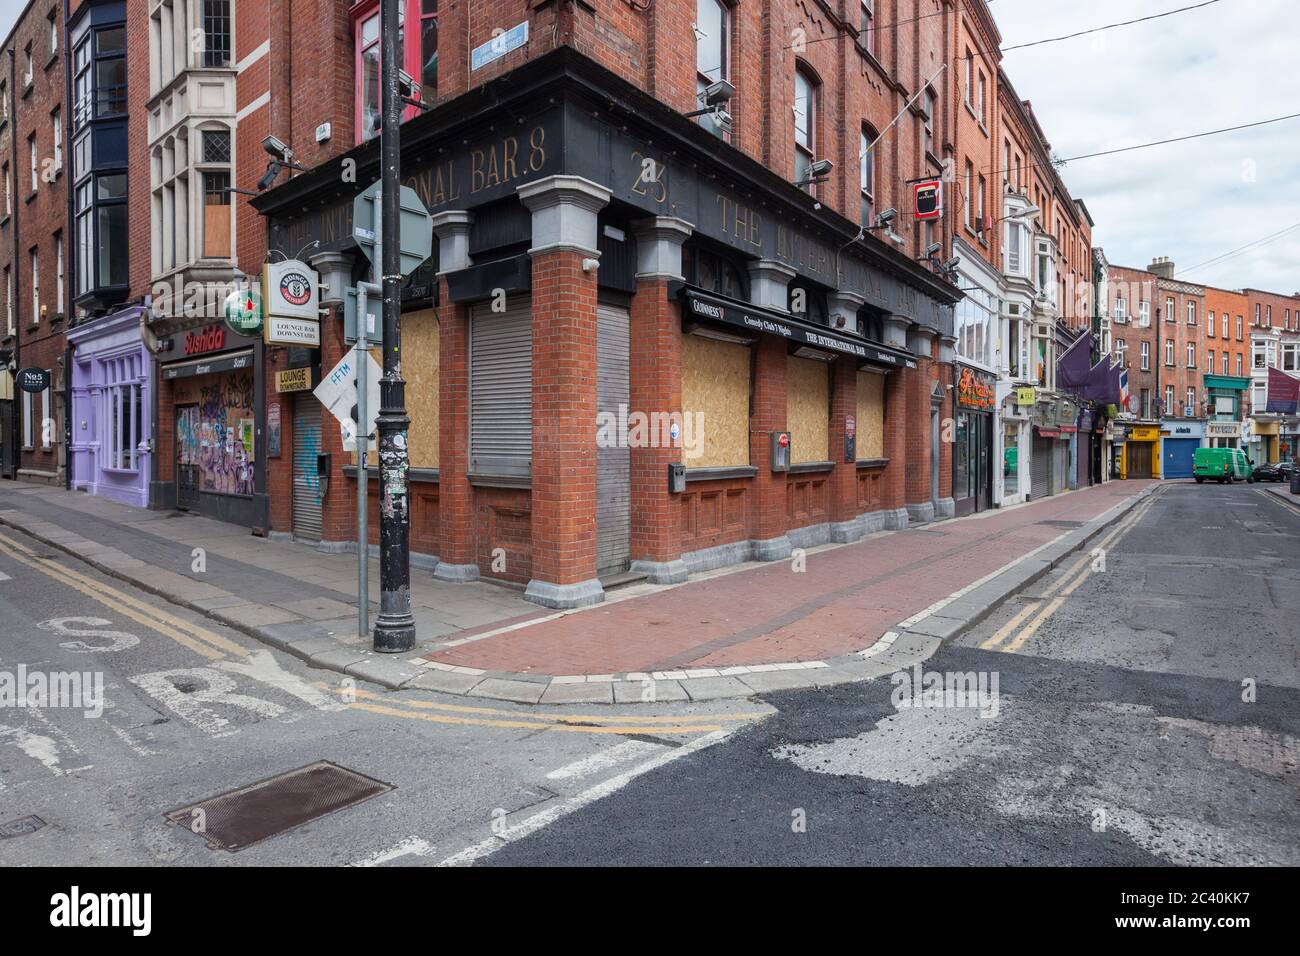 Dublin city center during Covid19 times in 2020. Closed shops, pubs, empty streets. Stock Photo